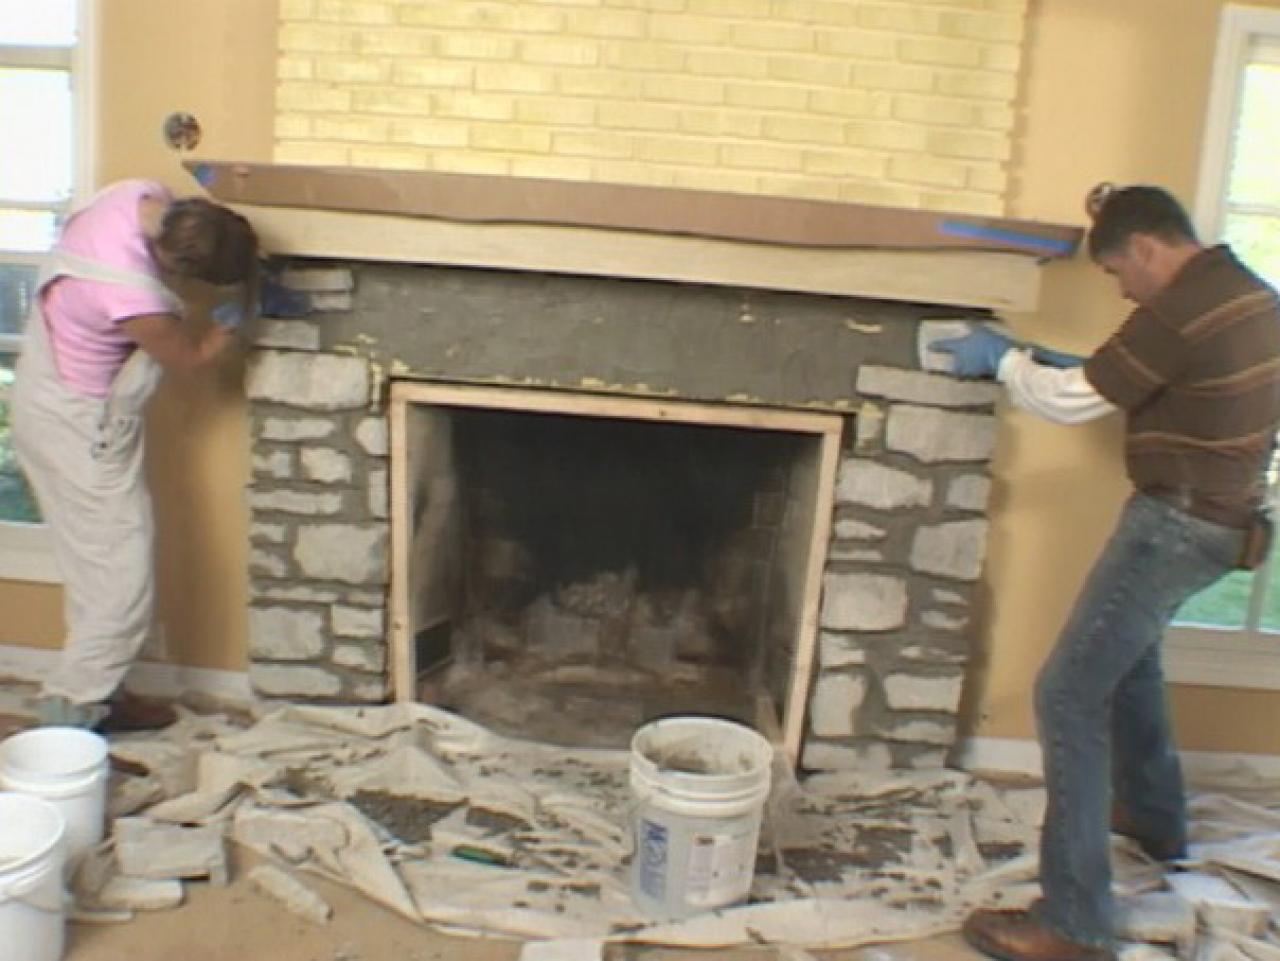 A Fireplace Mantel And Add Stone Veneer, Installing Fireplace Stone Veneer